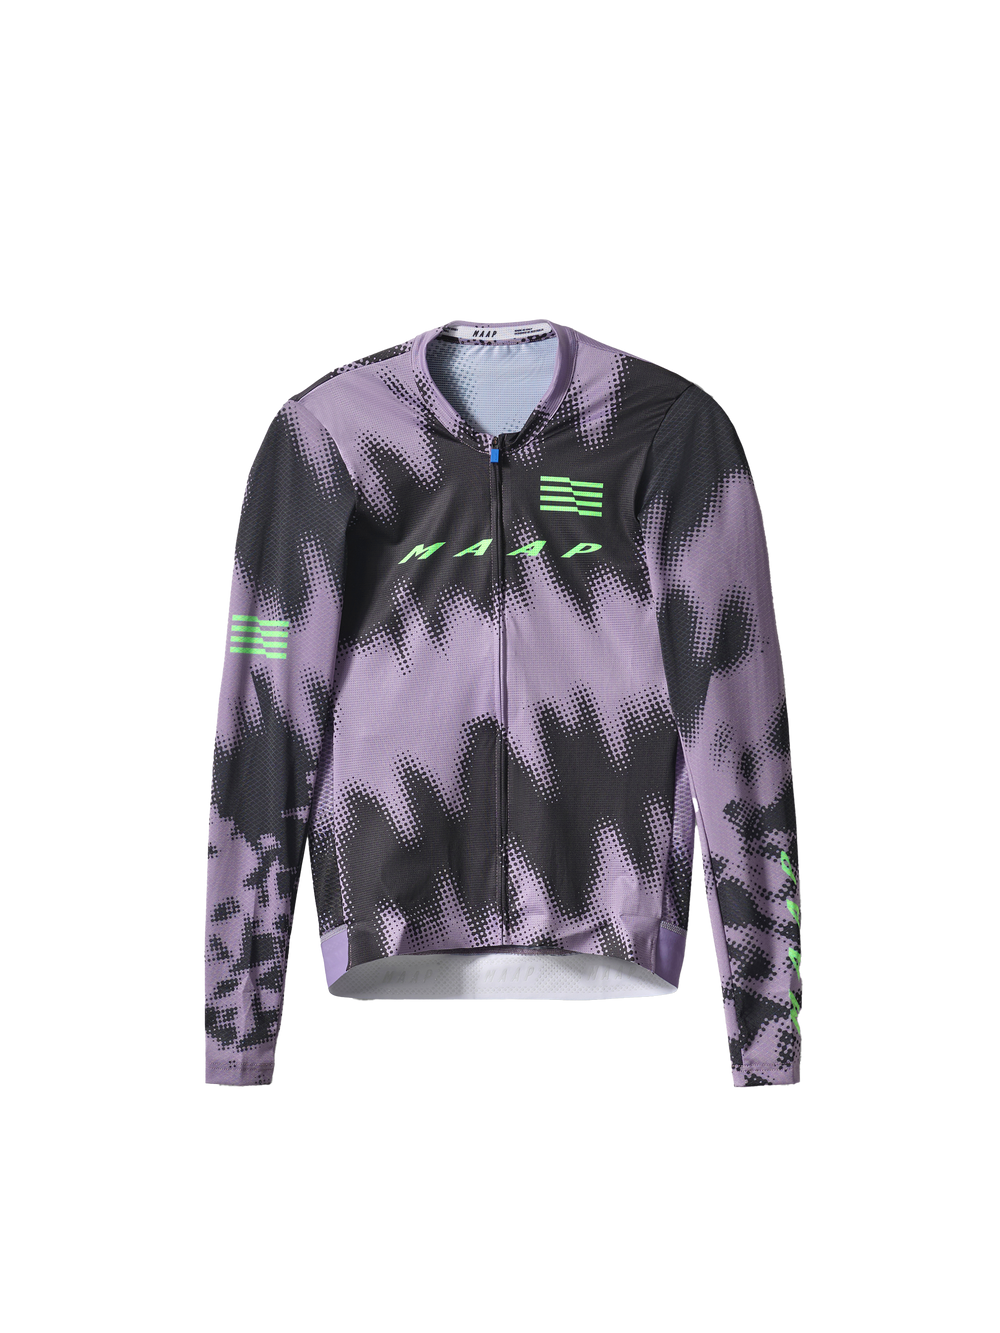 Product Image for LPW Pro Air LS Jersey 2.0